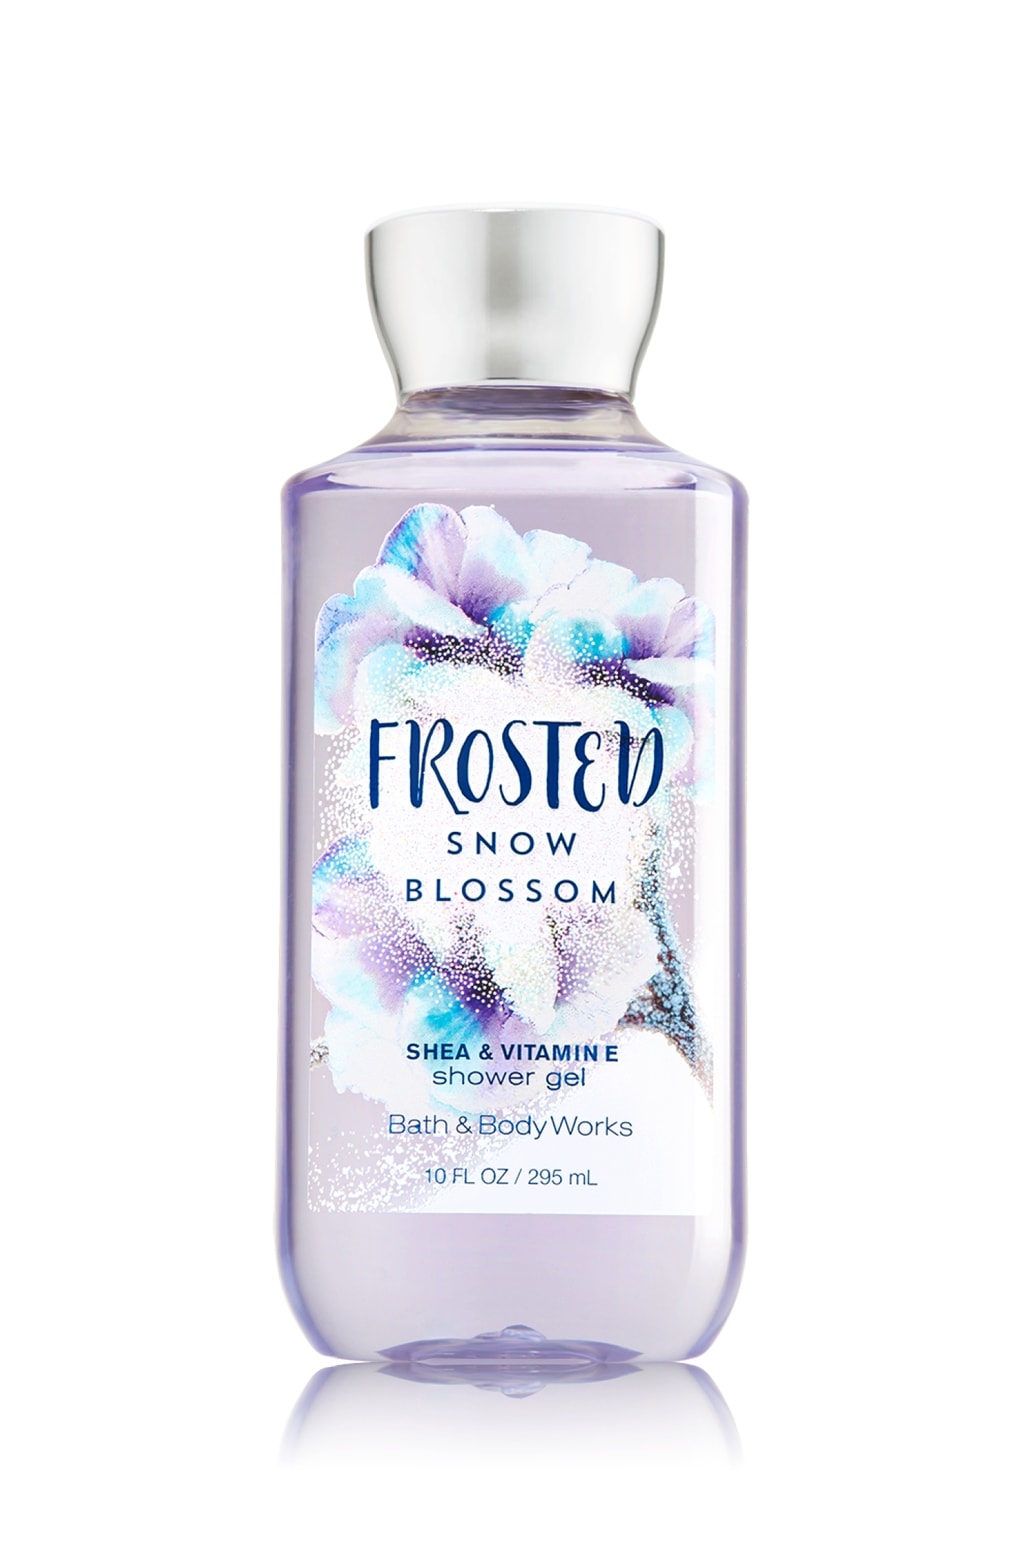 Frosted Snow Blossom shower gel